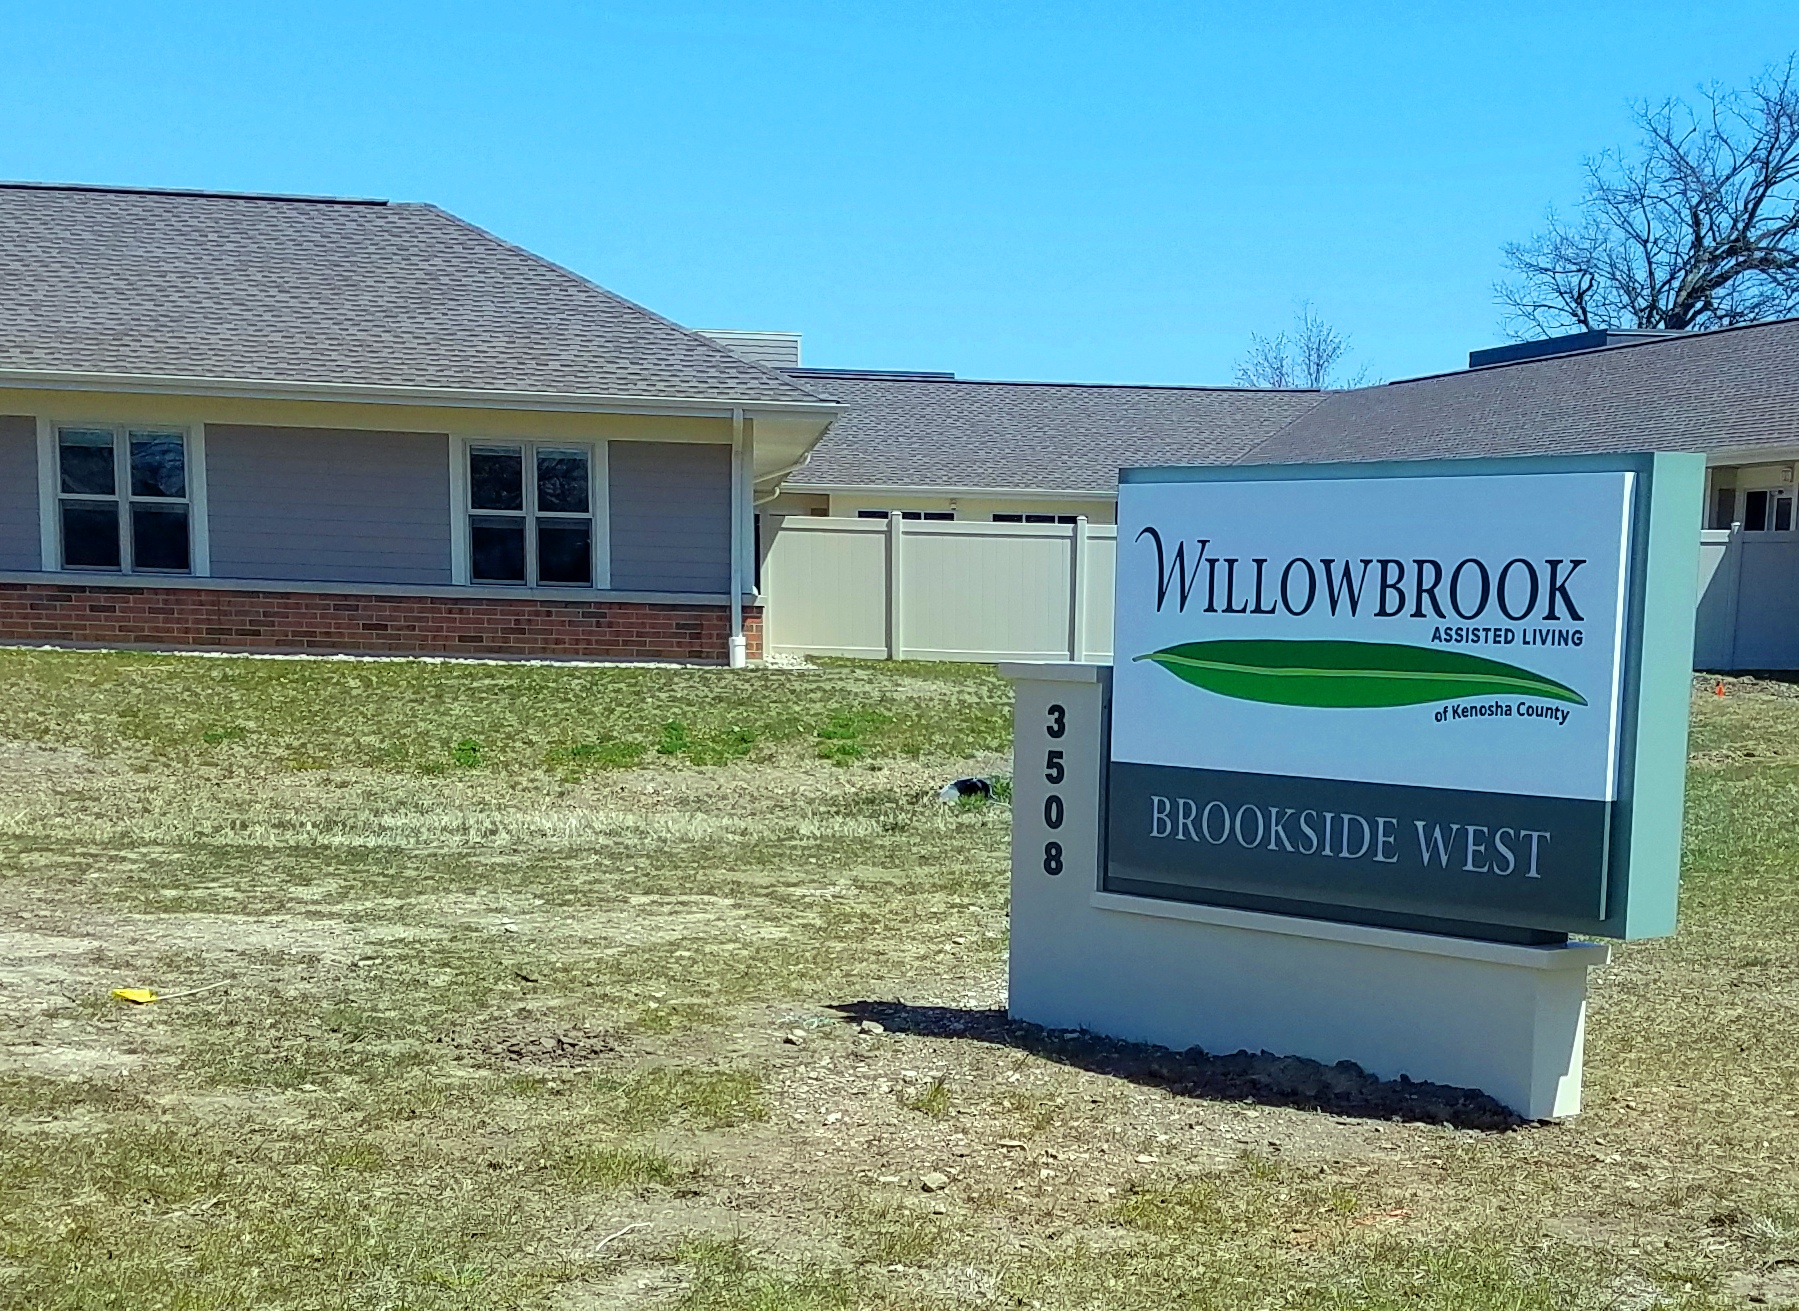 Willowbrook Assisted Living